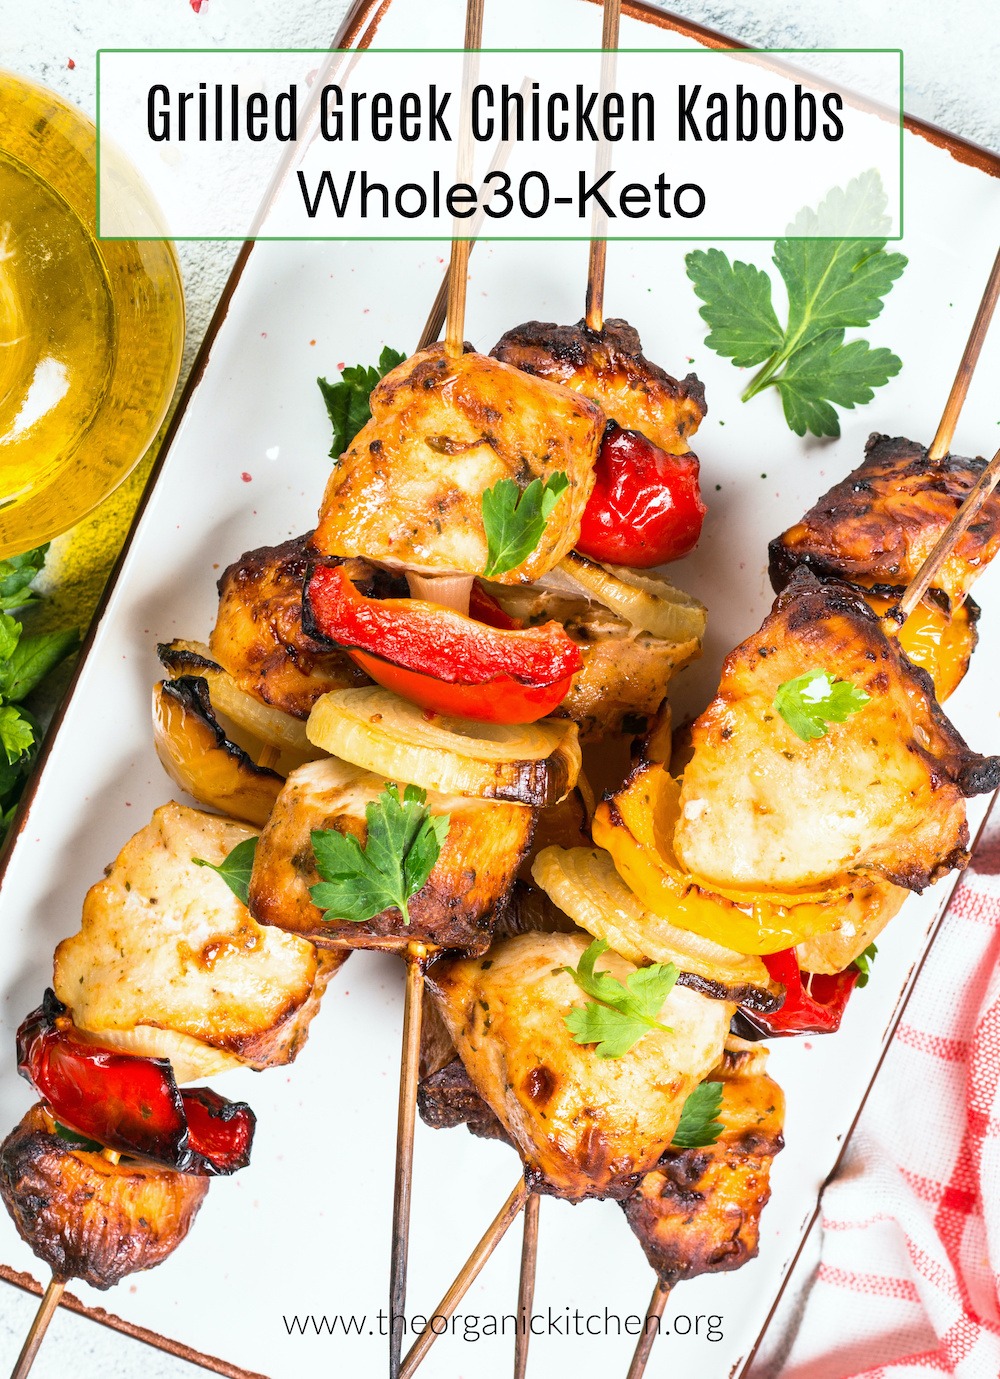 Grilled Greek Chicken Kabobs (Whole30-Keto)garnished with parsley on white plate 